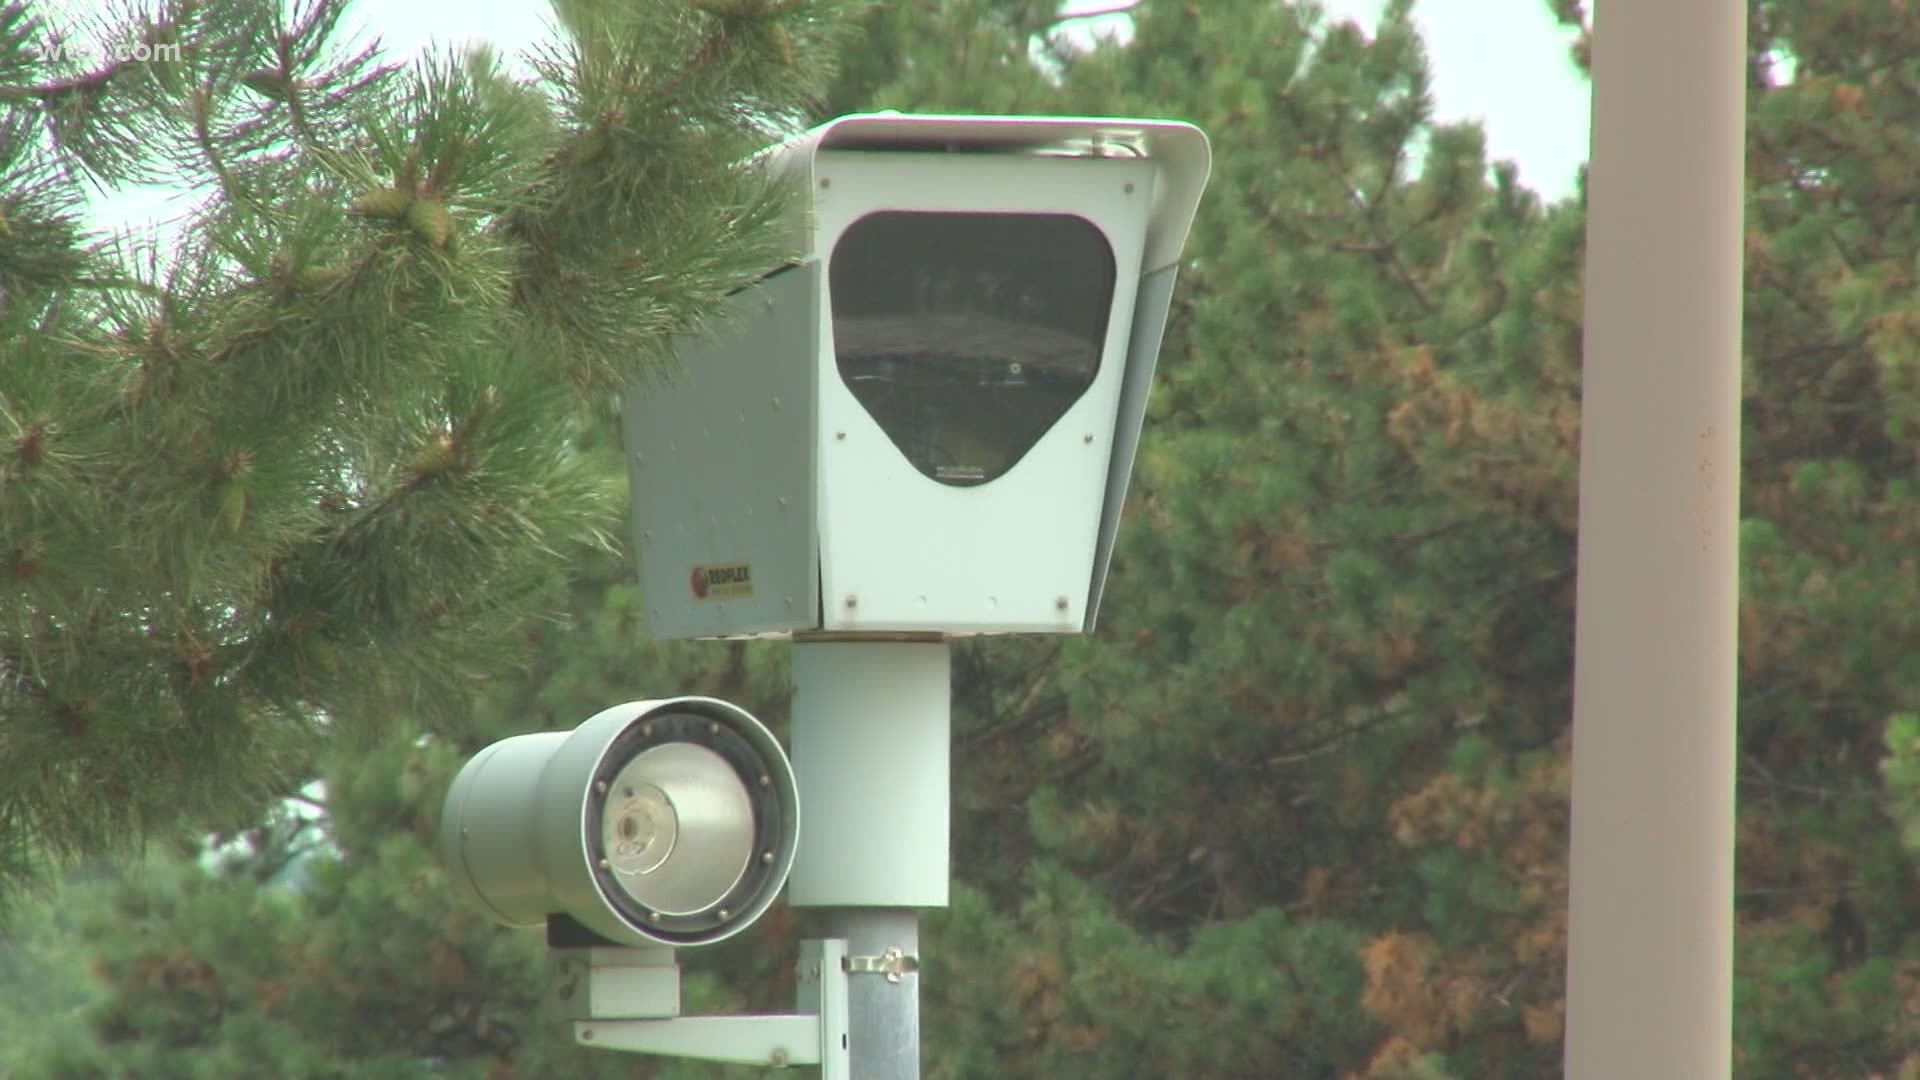 In the decision Magsig v. The City of Toledo, the court ruled that municipal courts have the "exclusive jurisdiction" to handle red-light camera violations.